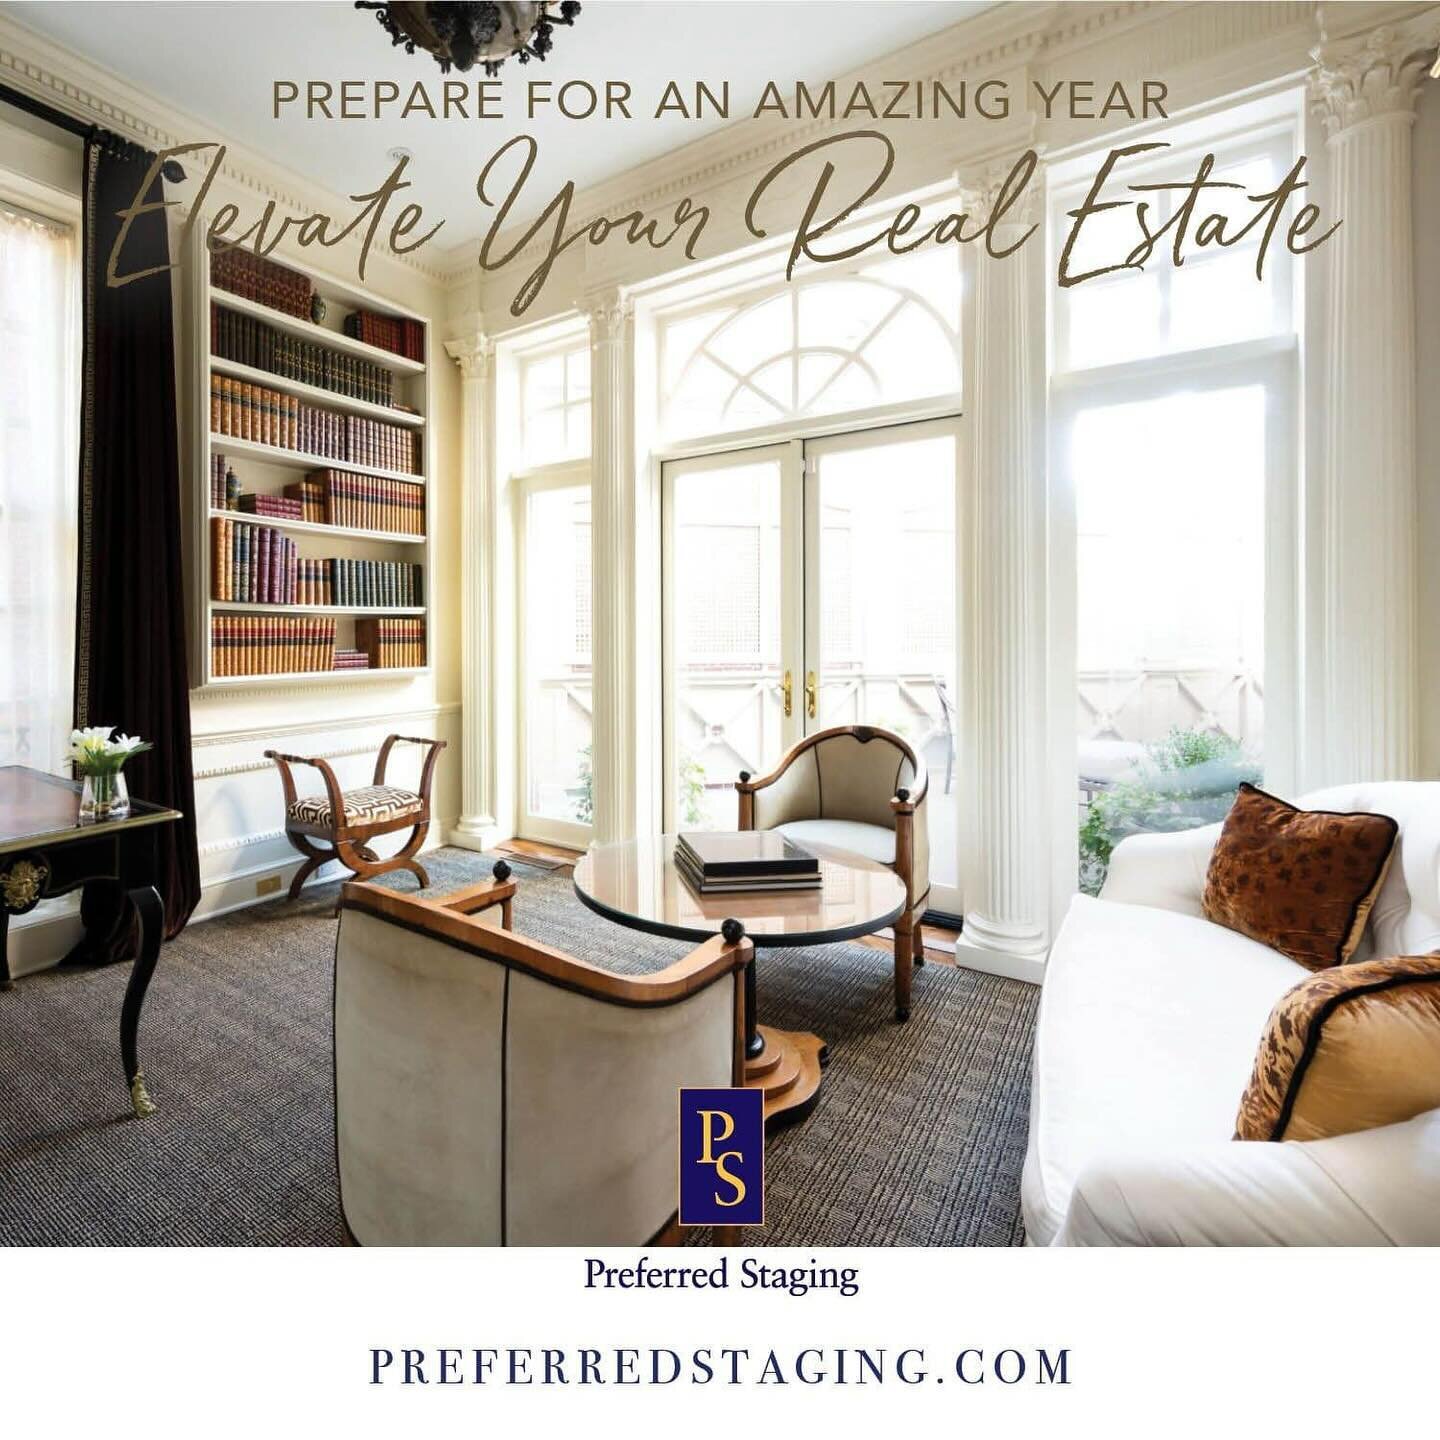 A new year = new goals. Are you ready to increase the value of your listings in 2024? Our award-winning home staging not only beautifies any listing, but it can add value to the asking price. Elevate your Real Estate this year with Preferred Staging!